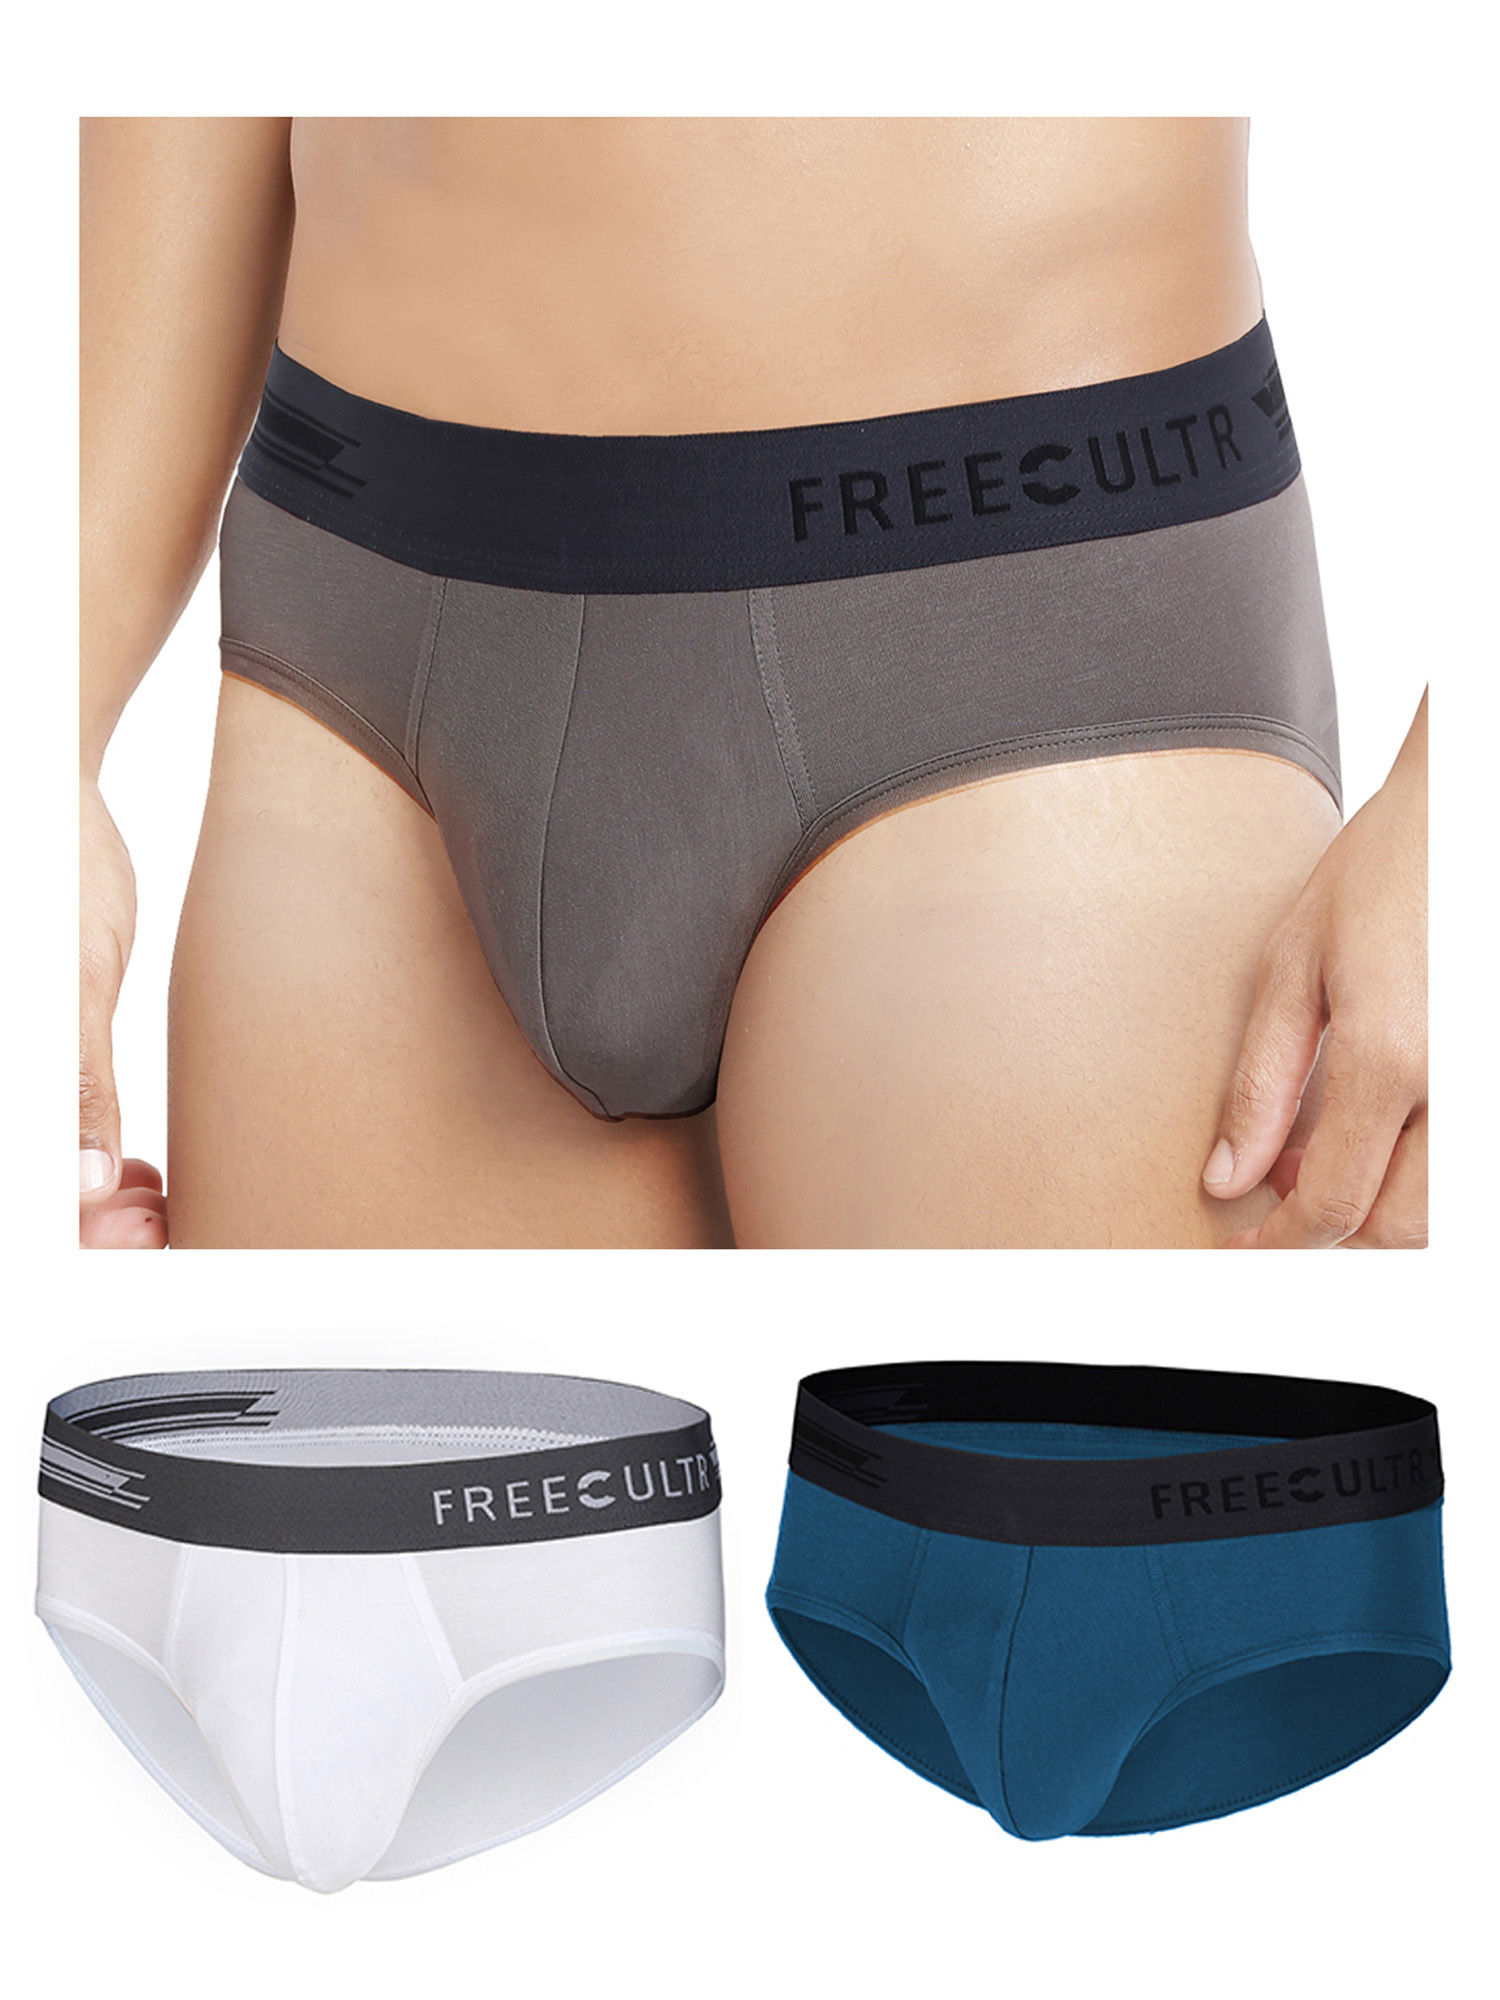 FREECULTR Anti-Microbial Air-Soft Micromodal Underwear Brief Pack Of 3 - Multi-Color (XL)